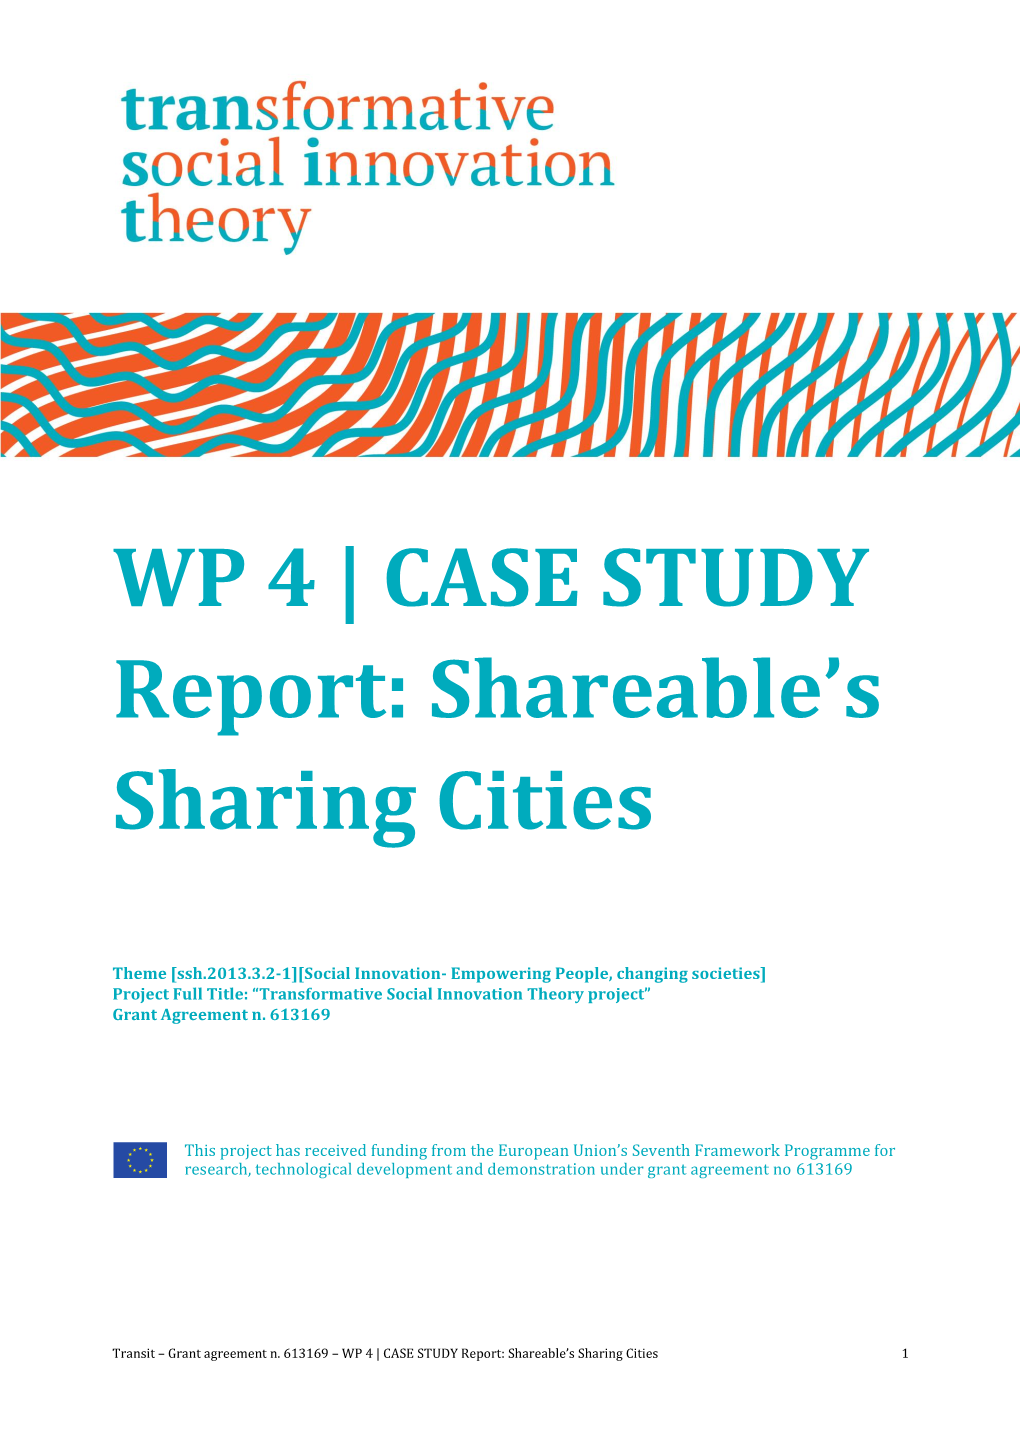 WP 4 | CASE STUDY Report: Shareable's Sharing Cities